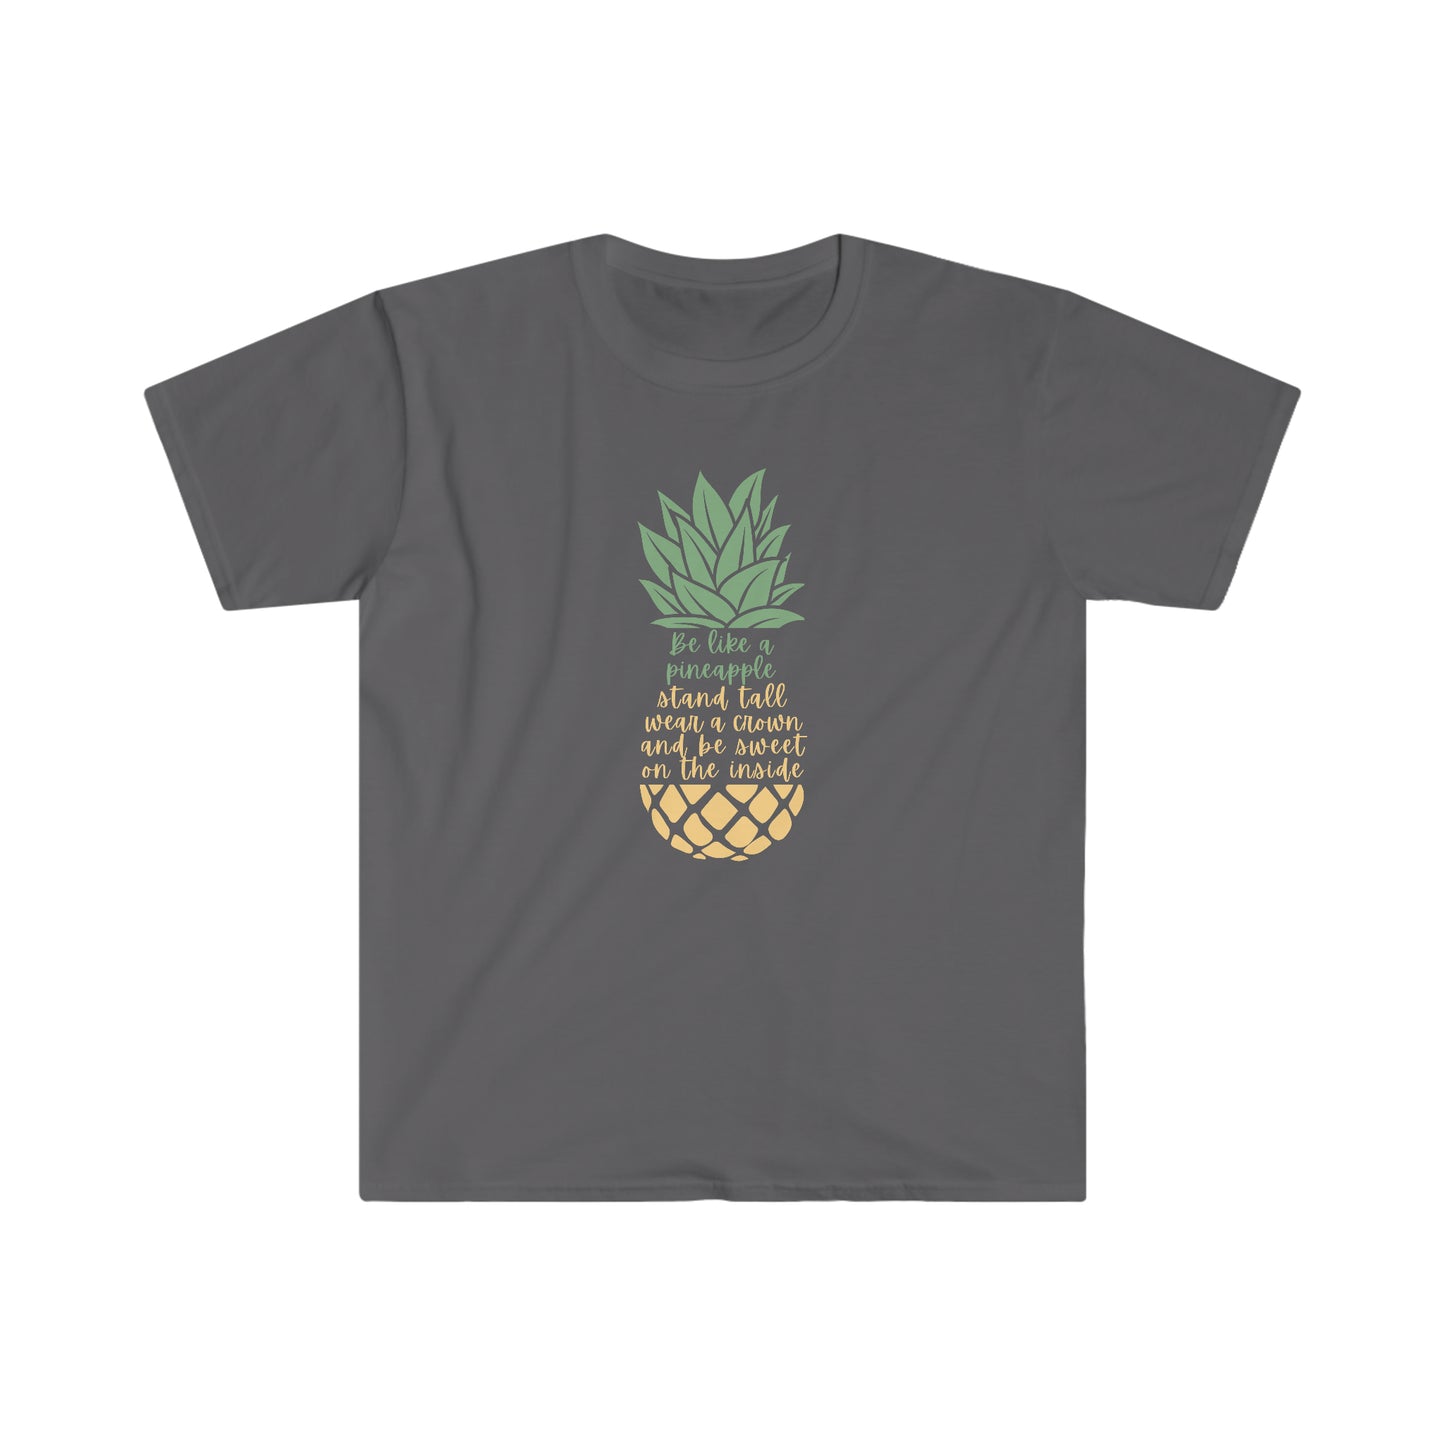 Unisex Softstyle T-Shirt, Be Like a Pineapple